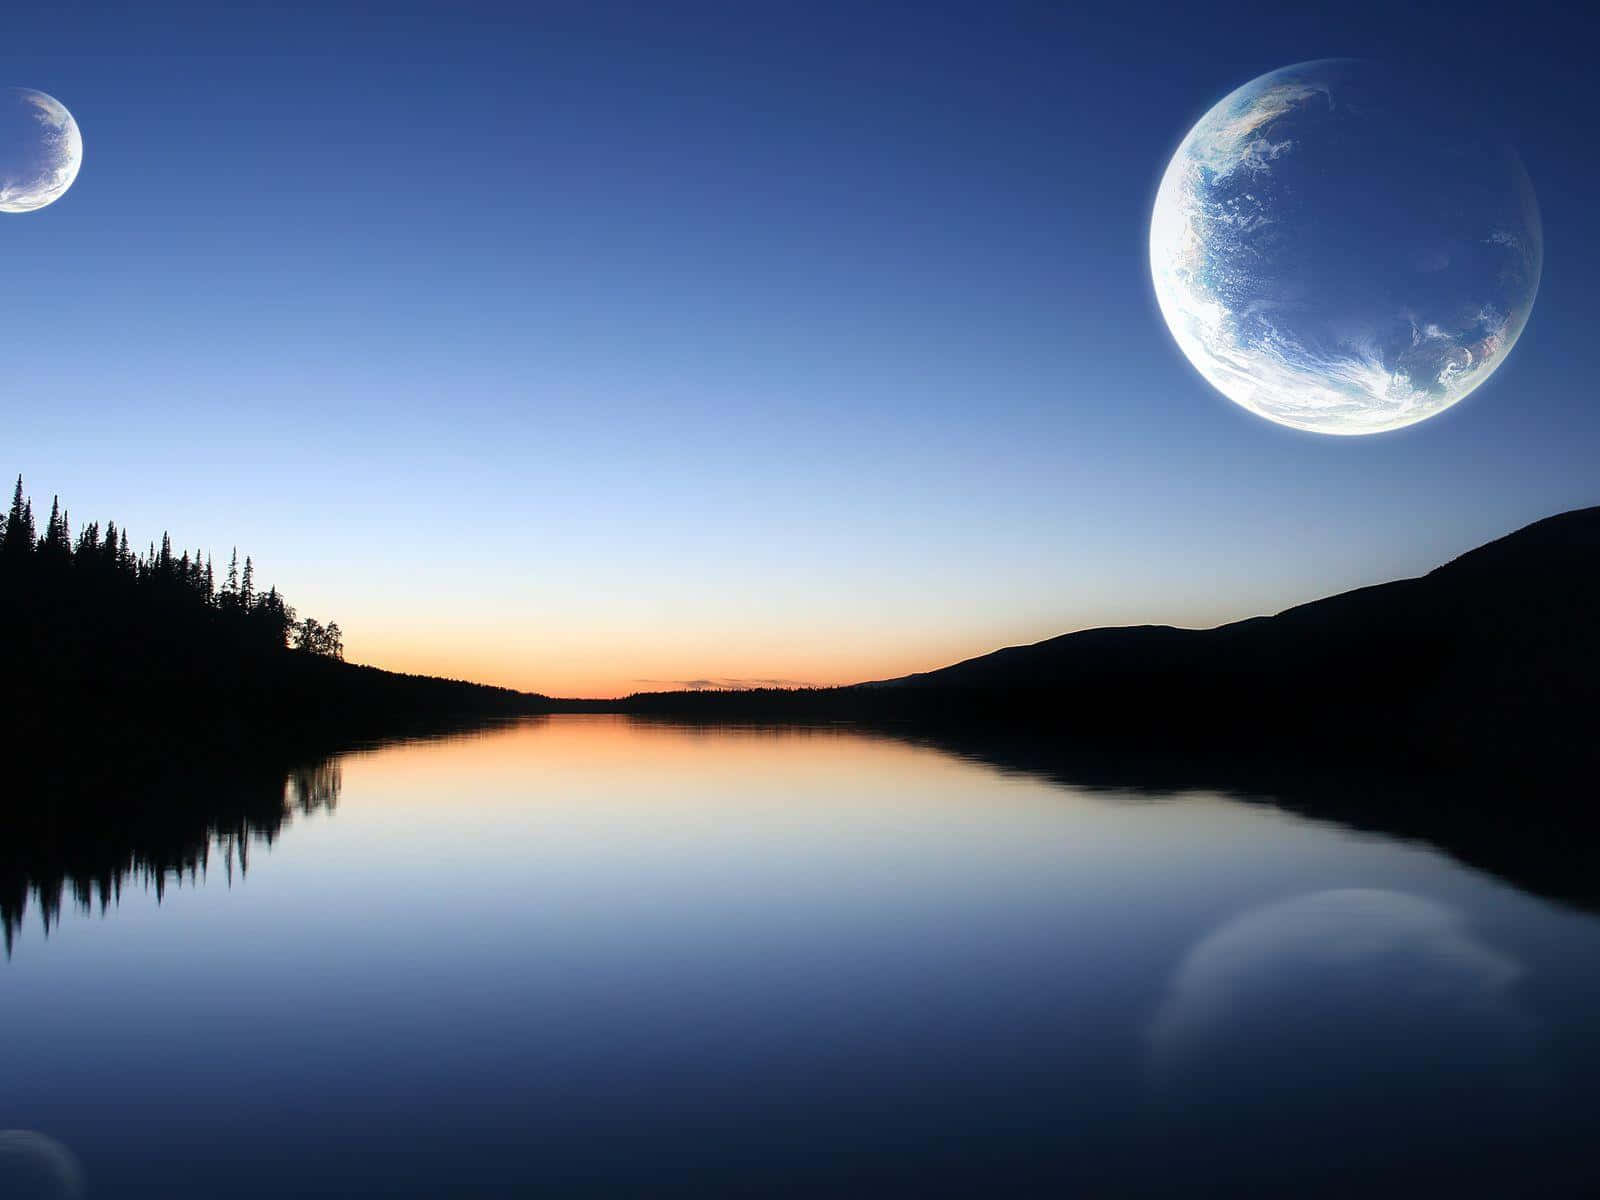 Moon And Planets In The Water